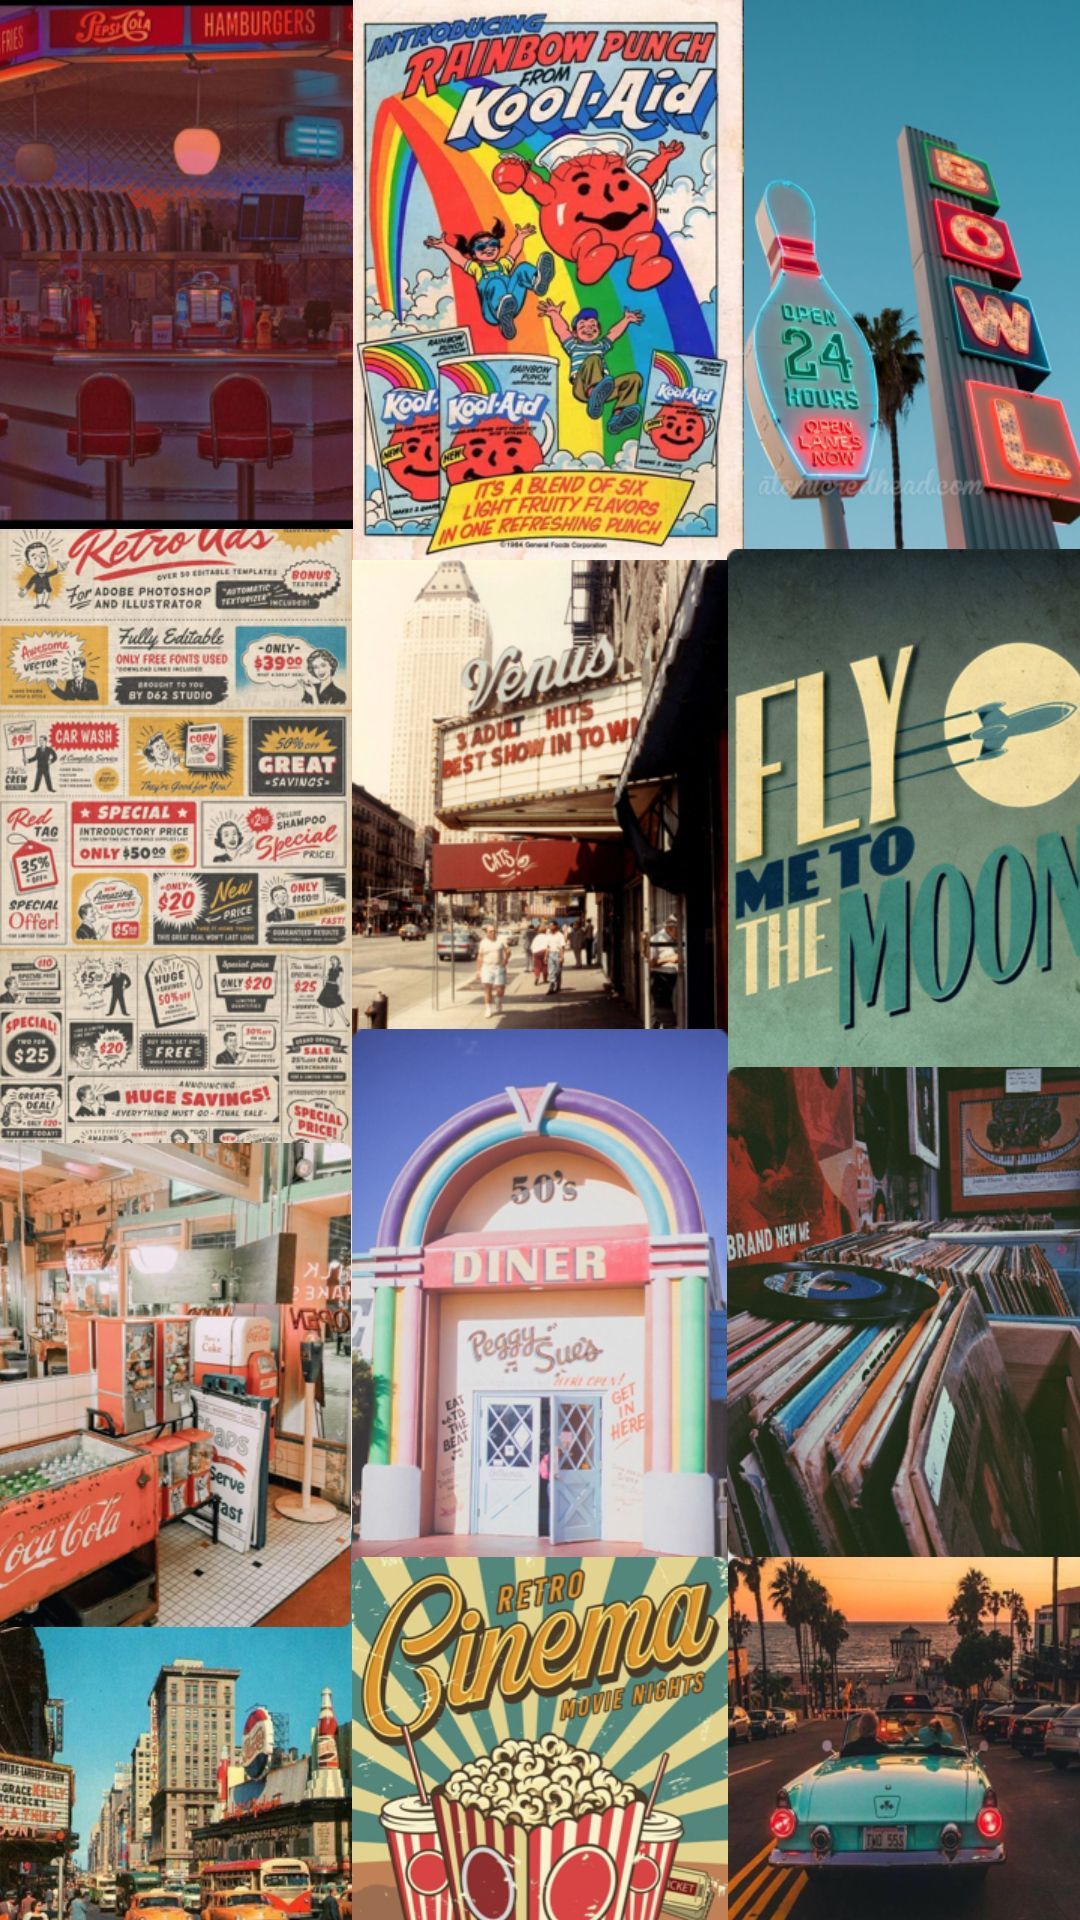 Collage of 1950s themed images including vintage signs, a diner, a cinema, and a retro phone. - Retro